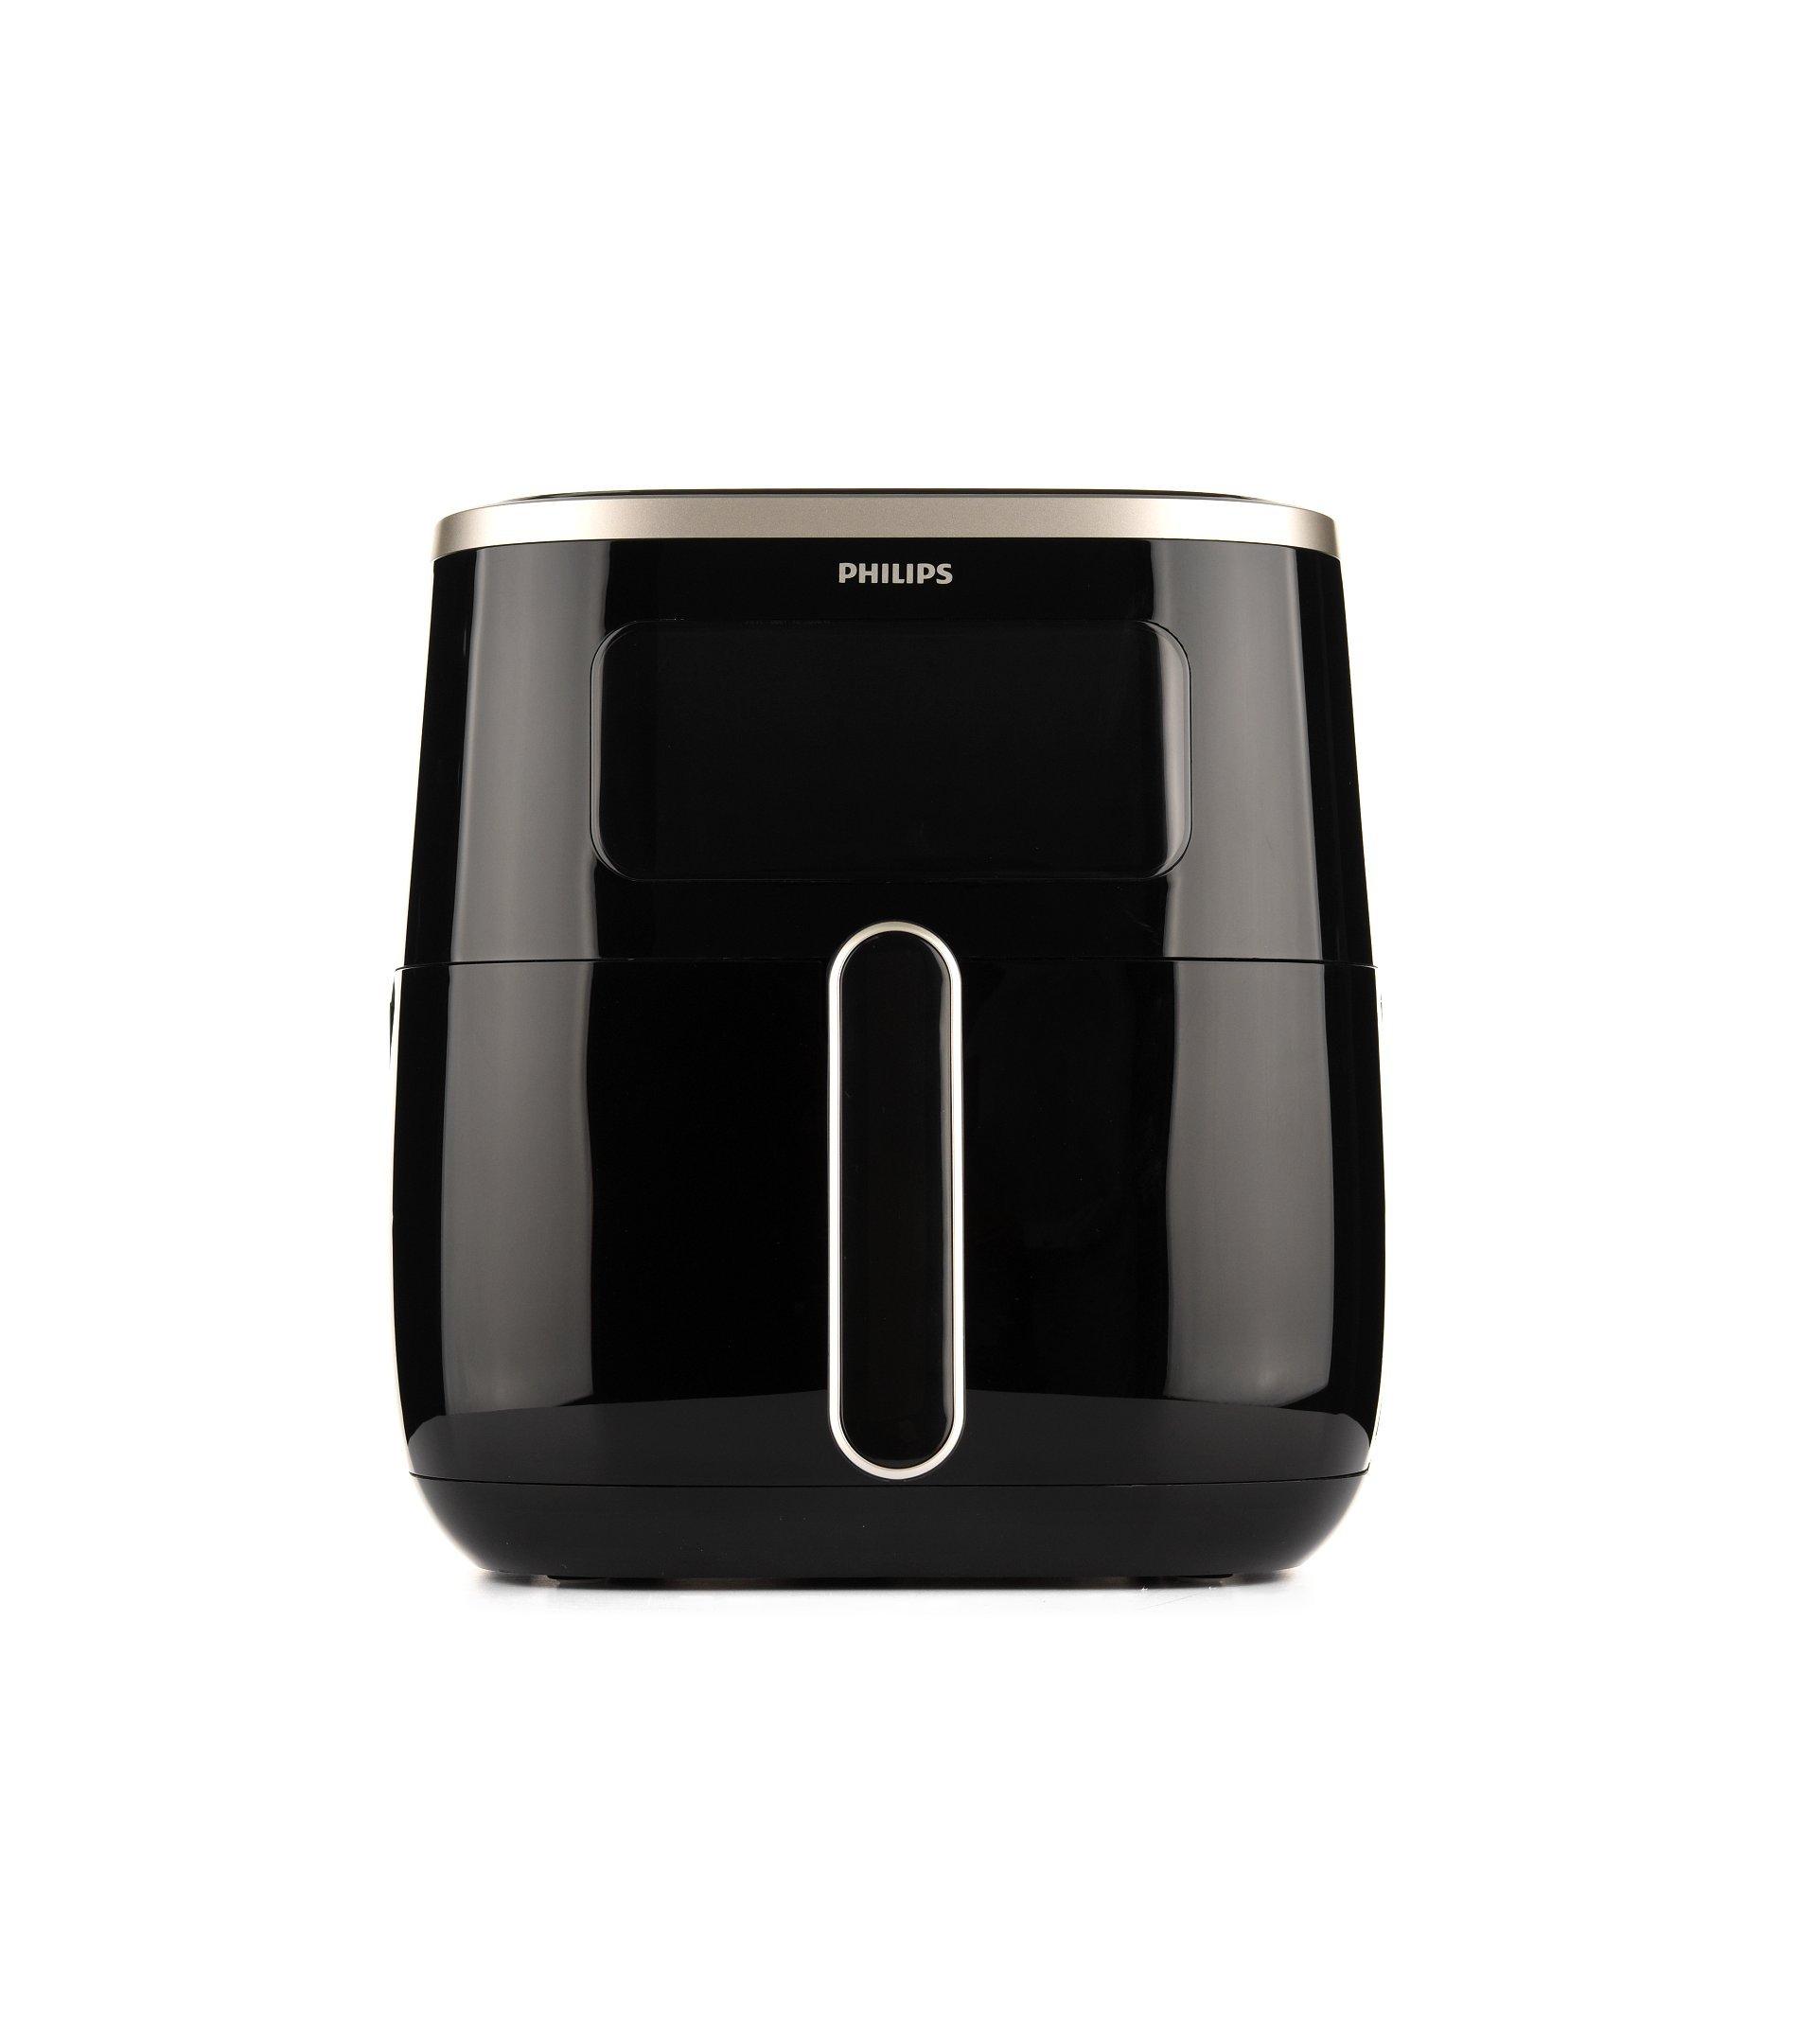 Philips Essential Airfryer Compact vs Philips Philips 3000 Series Airfryer  Compact: What is the difference?